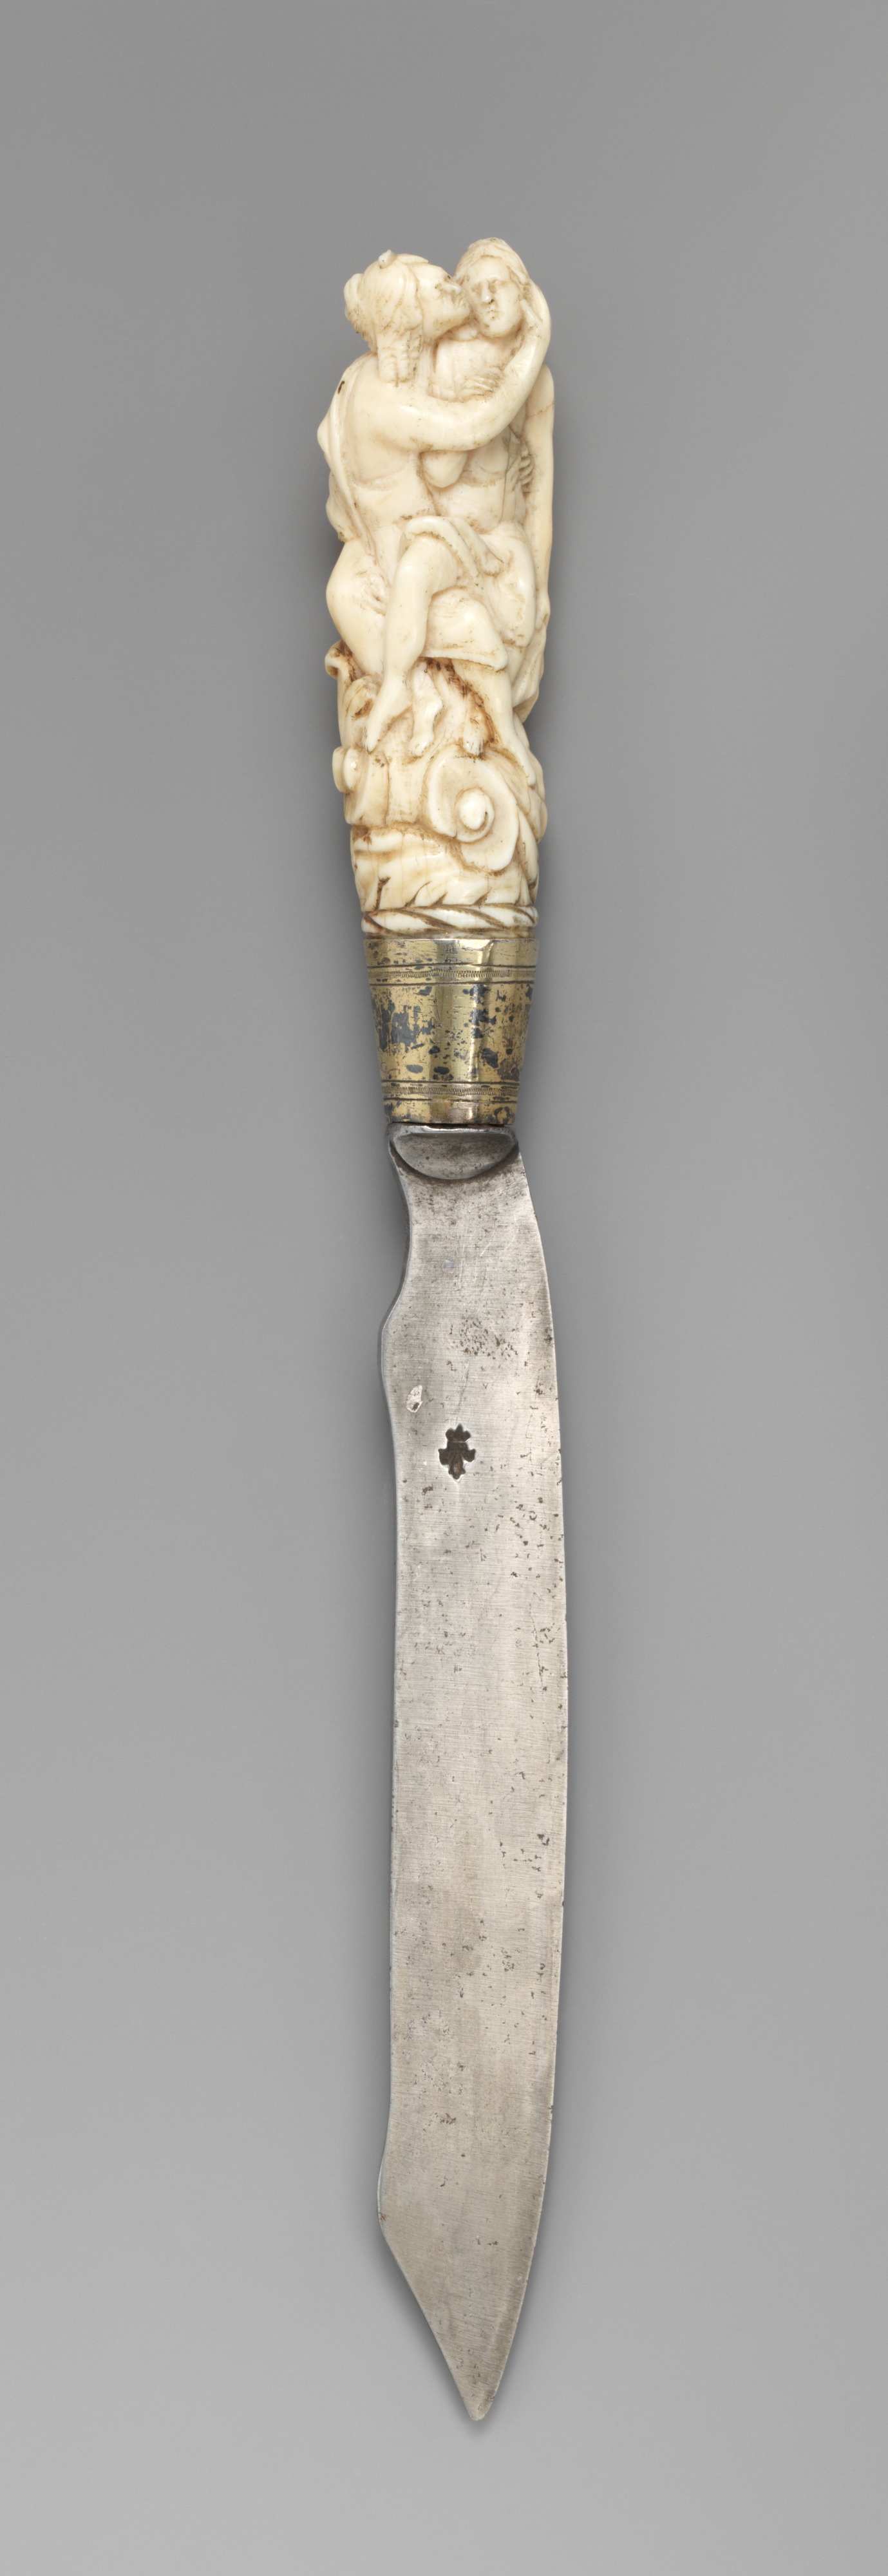 Pastry knife, Southern German, possibly Bavarian